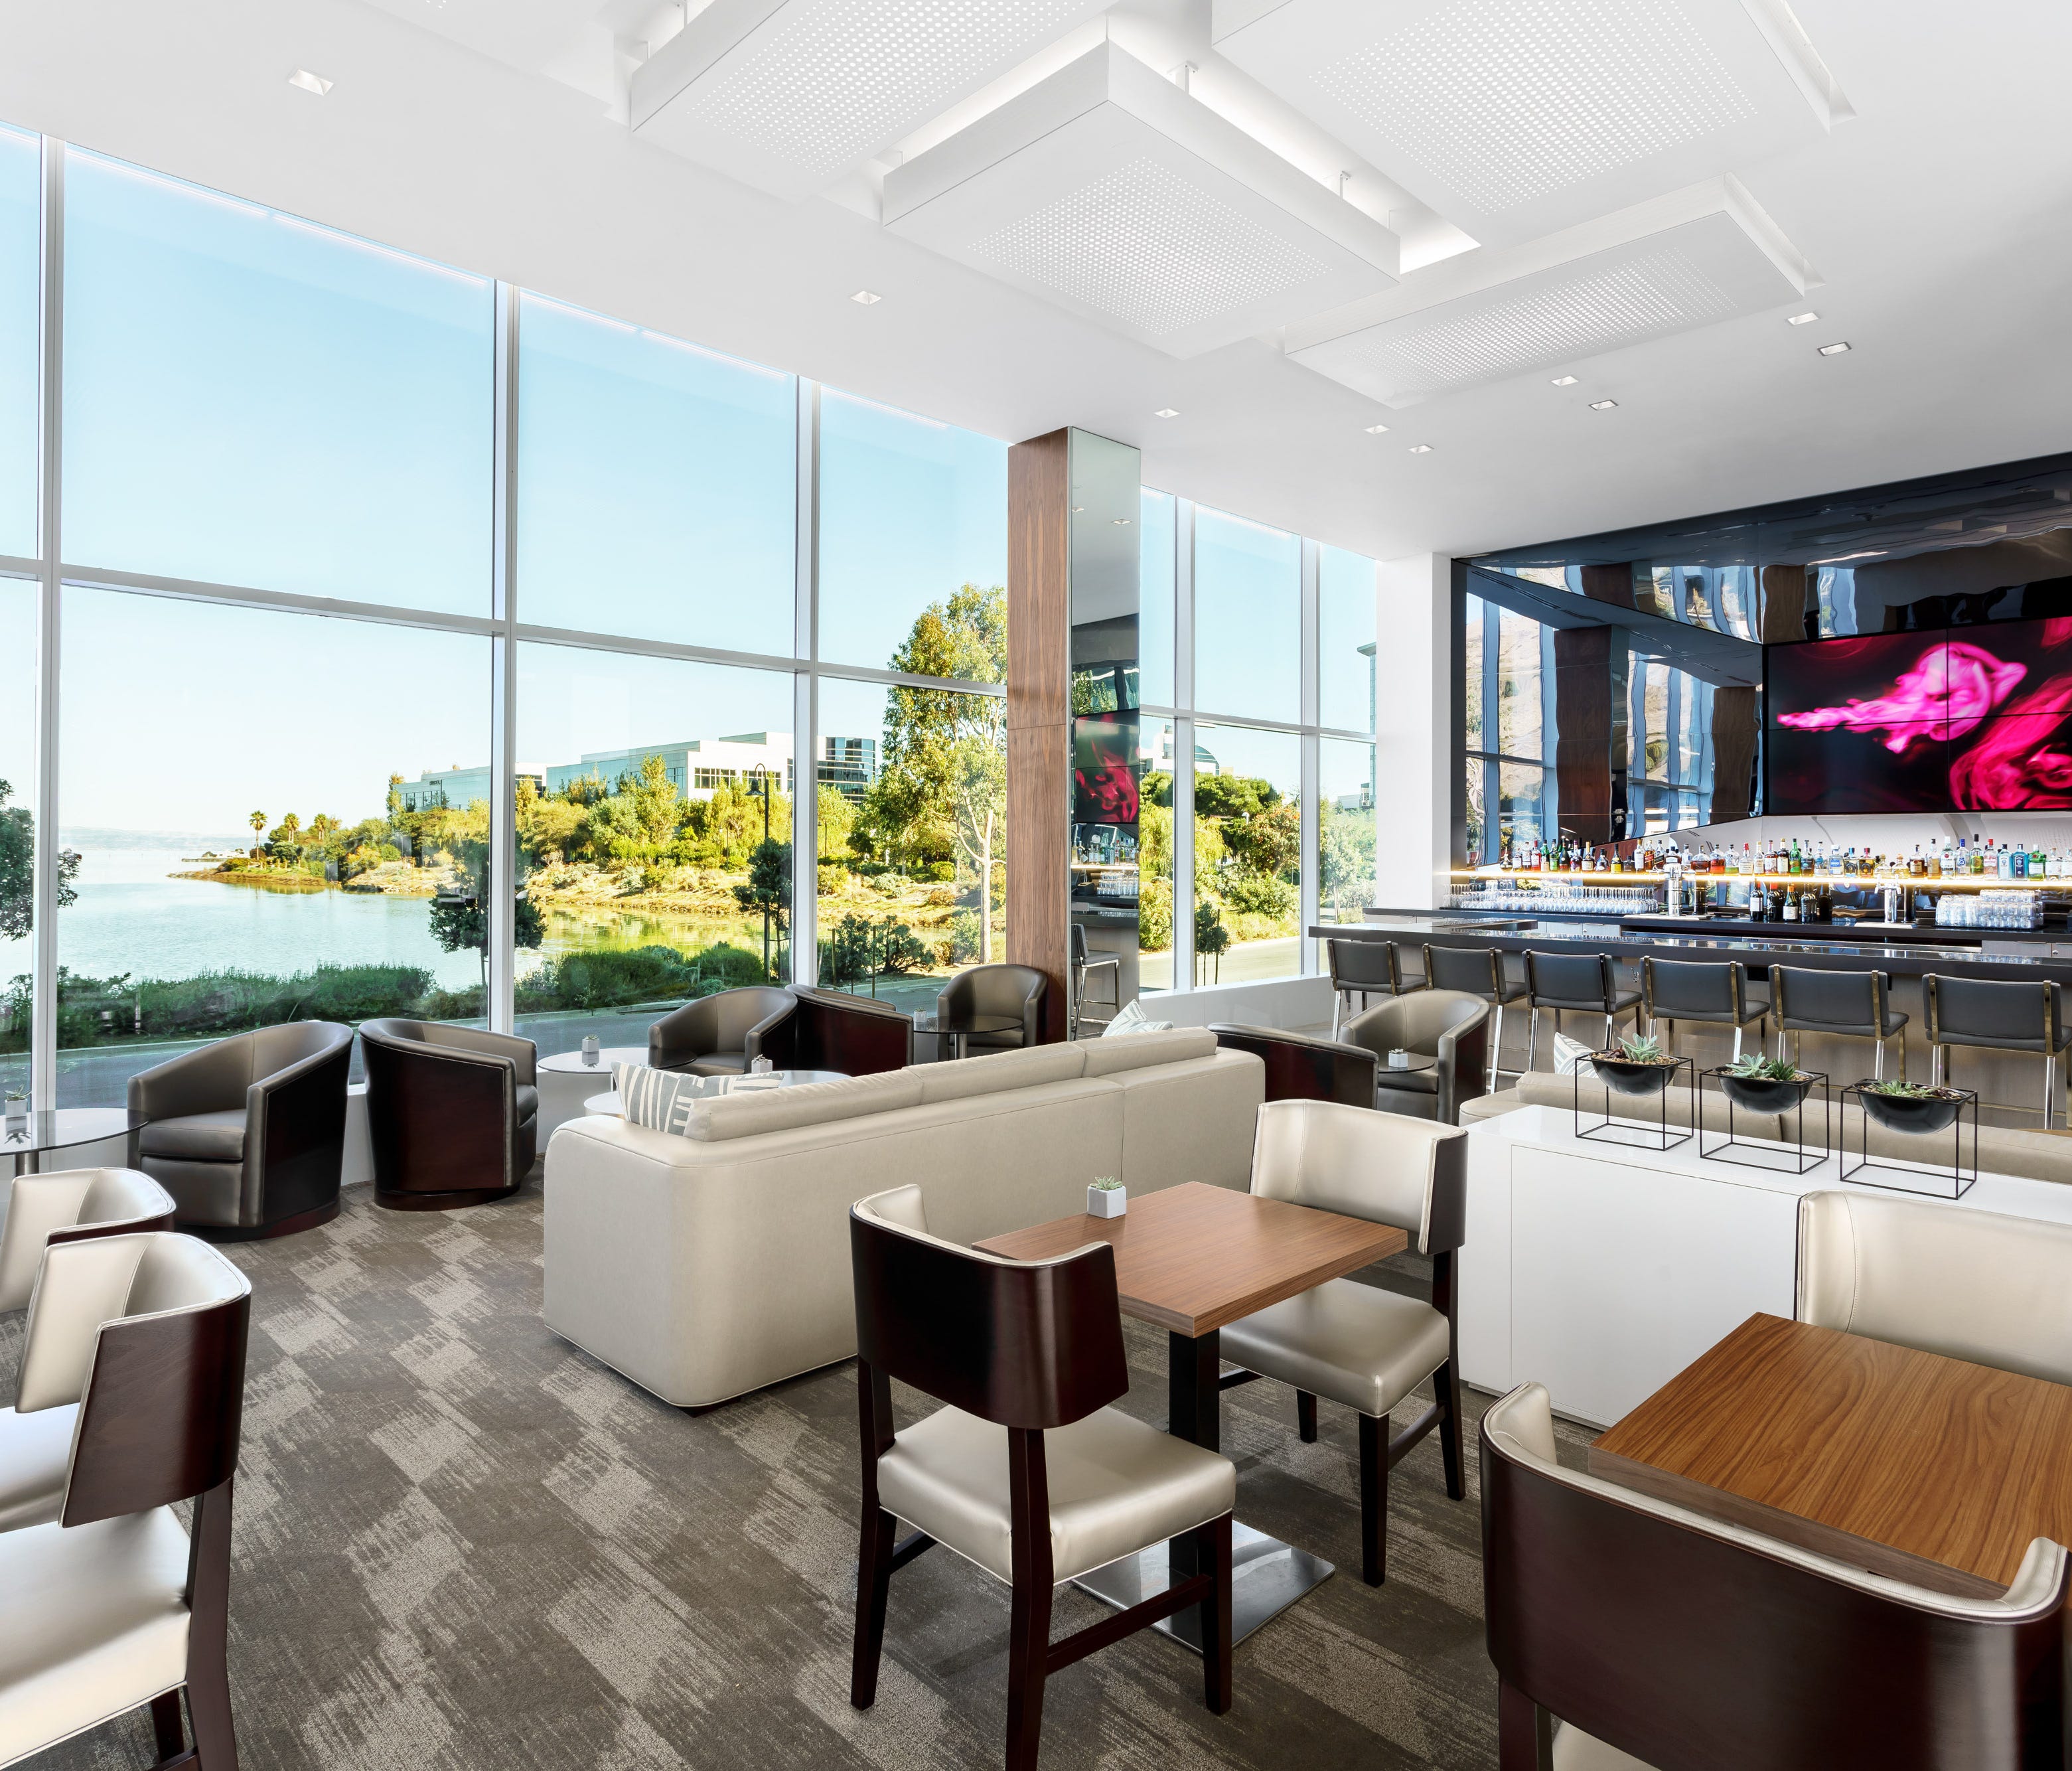 A new AC Hotel has opened near San Francisco International Airport. This is the lounge by day.